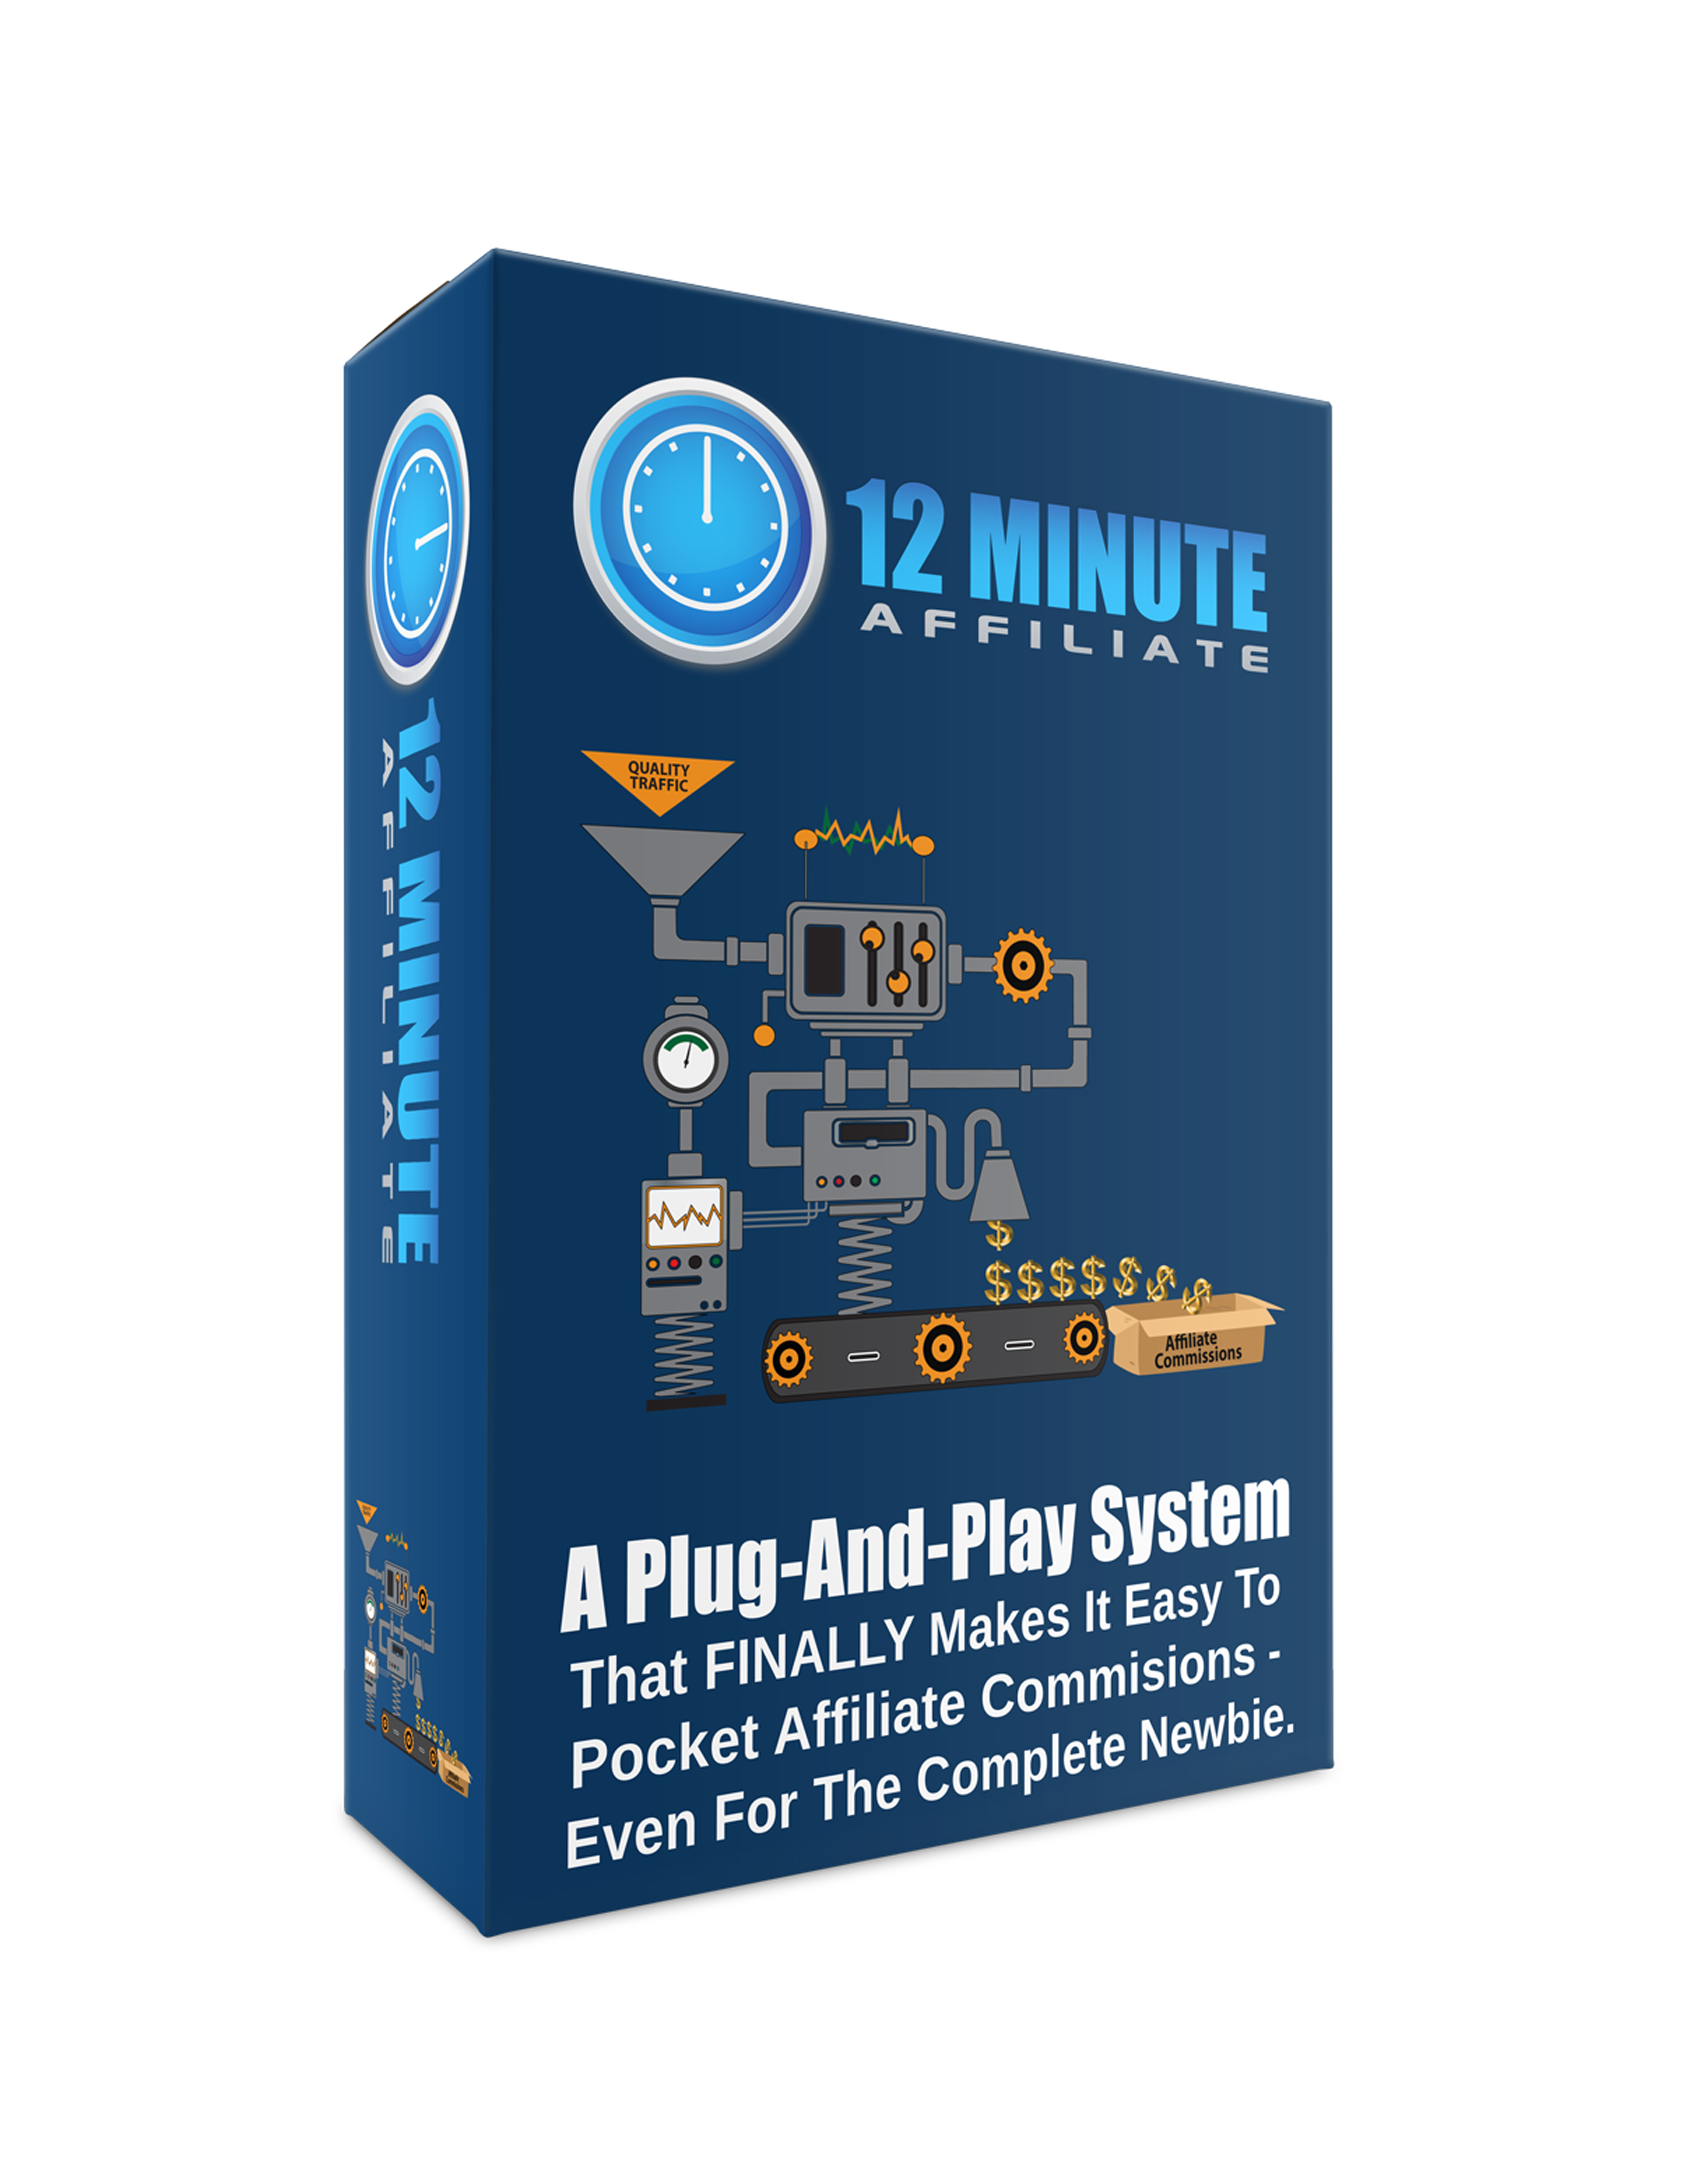 12 Minute Affiliate review